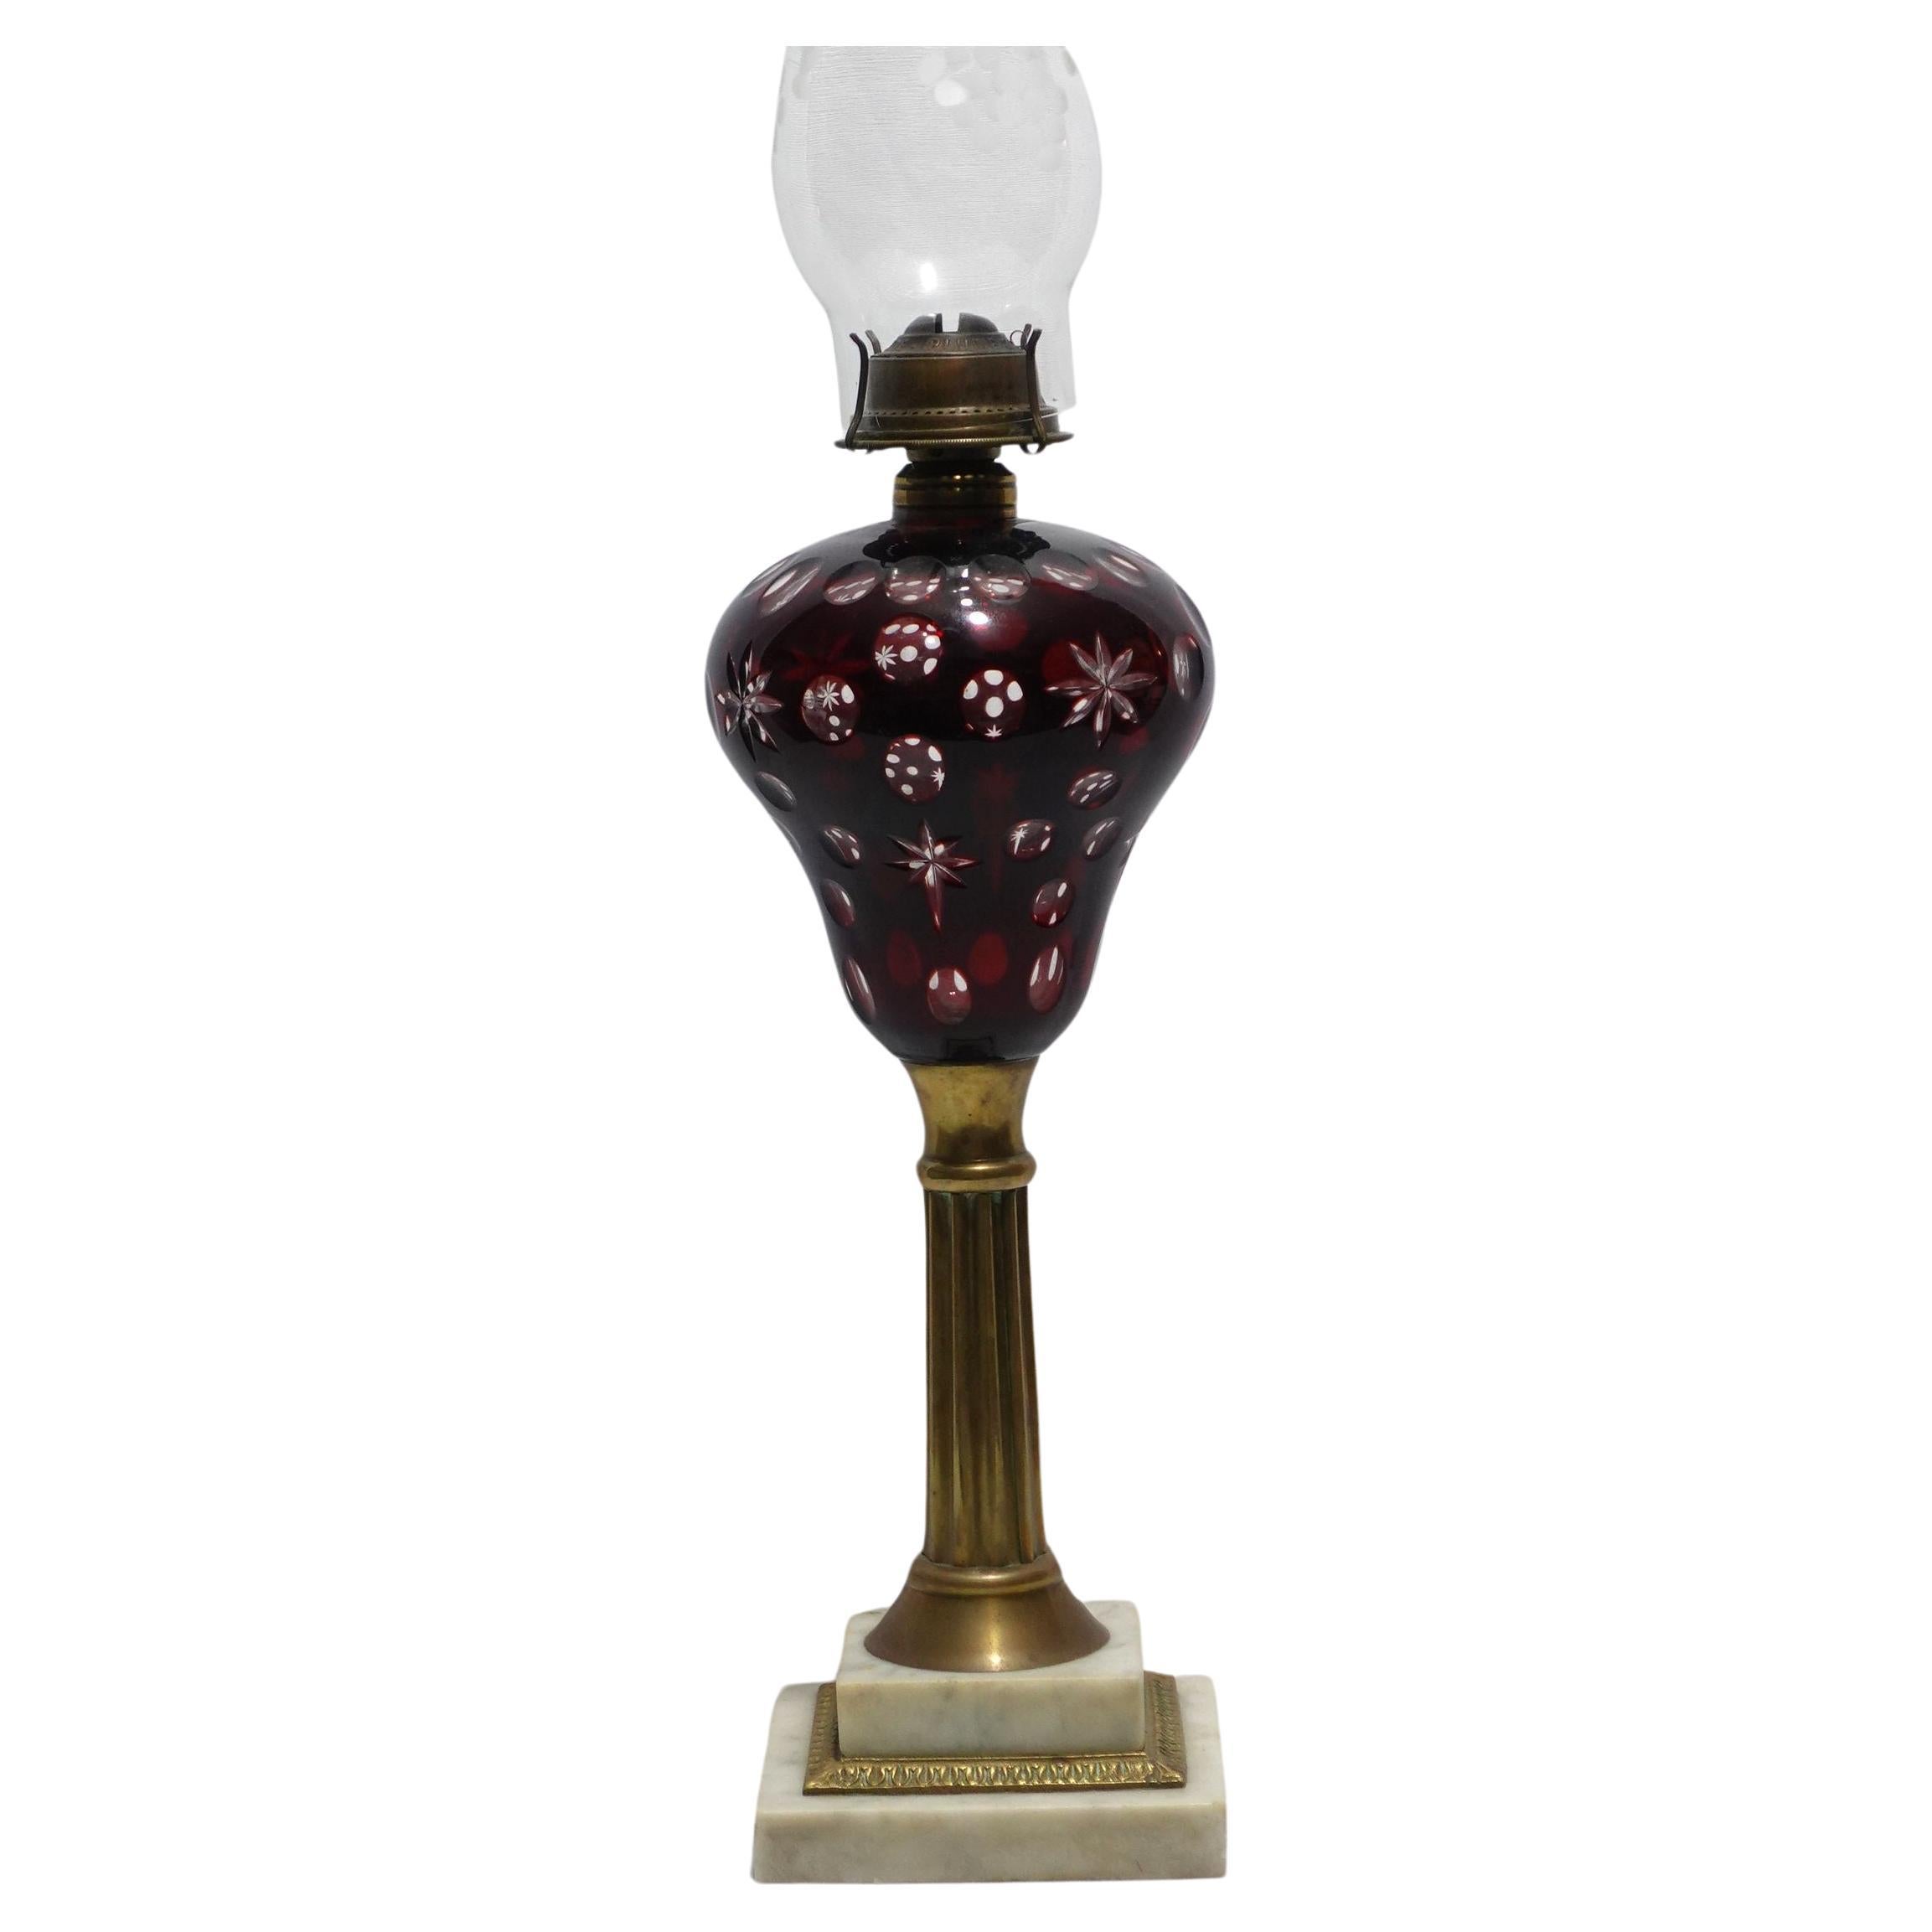 An Old Cranberry Cut To Clear Fluid Lamp with a classical form of a column on a marble base. 22 1/2